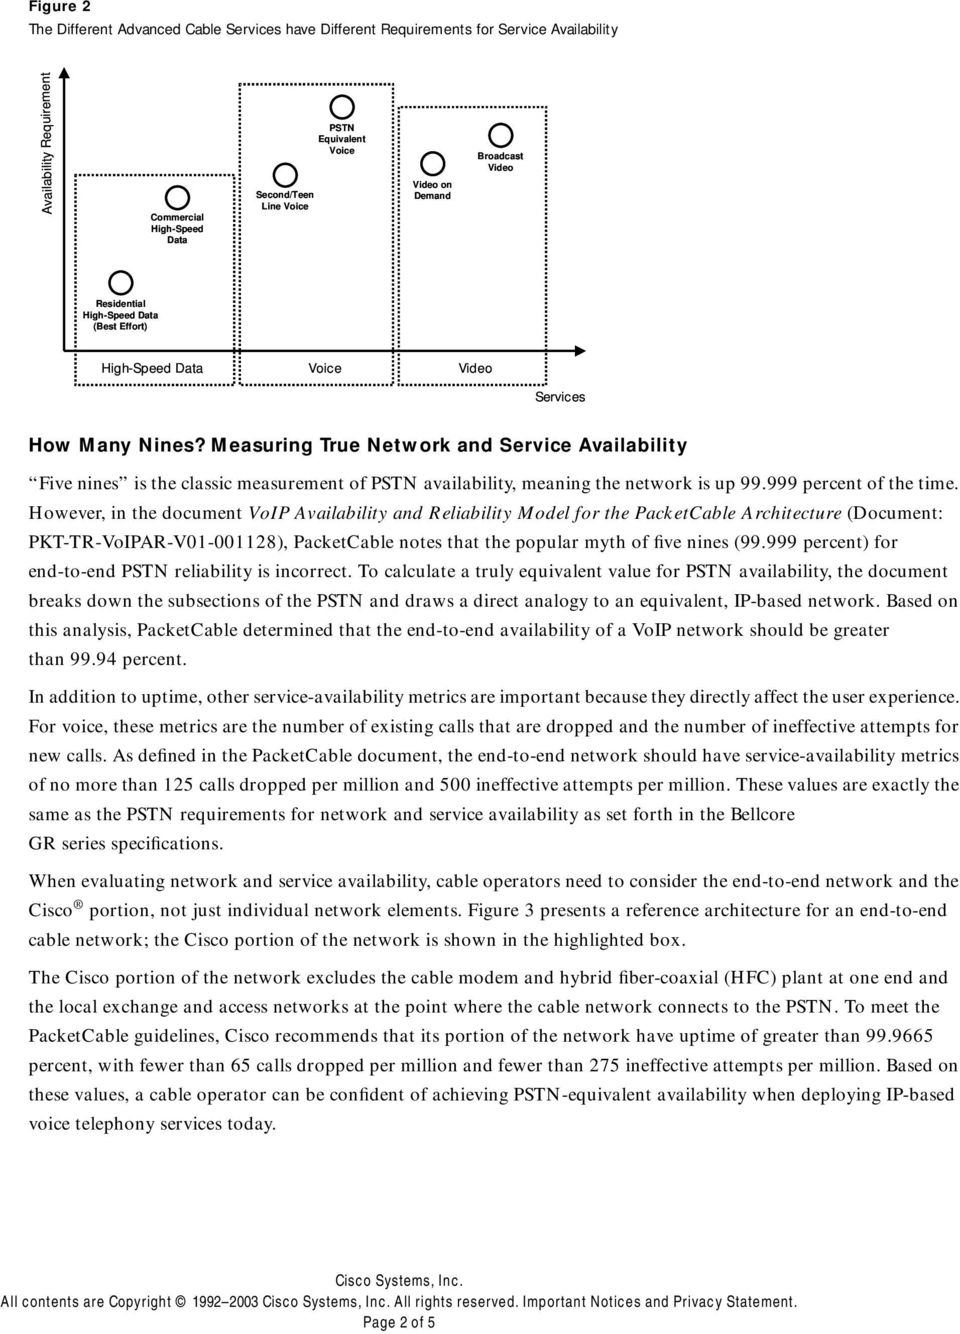 Measuring True Network and Service Availability Five nines is the classic measurement of PSTN availability, meaning the network is up 99.999 percent of the time.